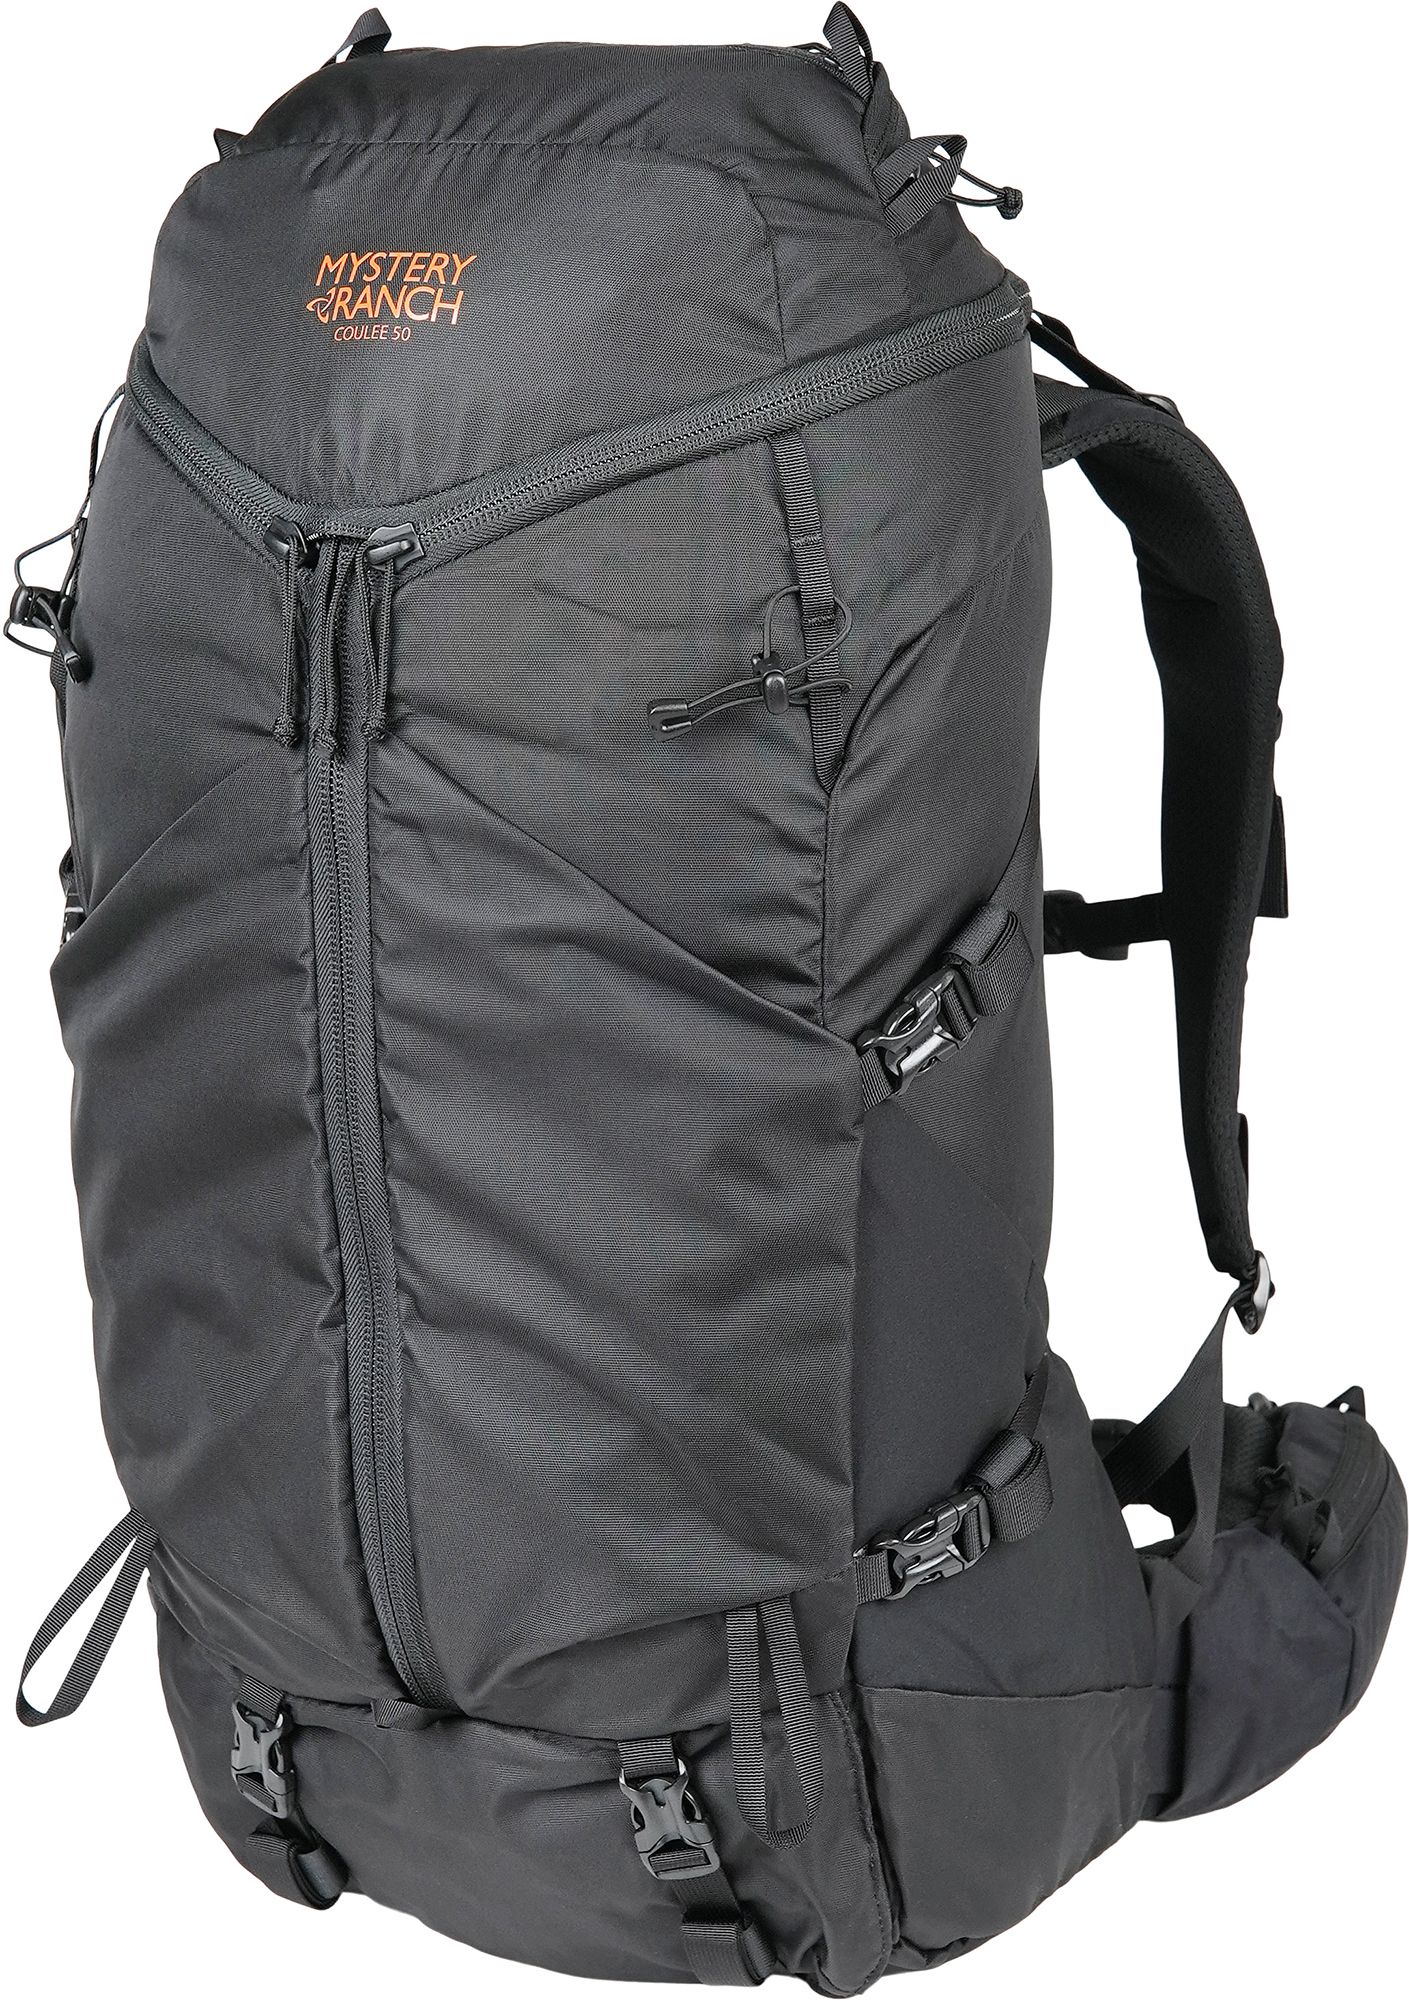 Photos - Knife / Multitool Mystery Ranch Men's Coulee 50L Pack, Large, Black 23ZZFMMCL50XXXXXXCTP 